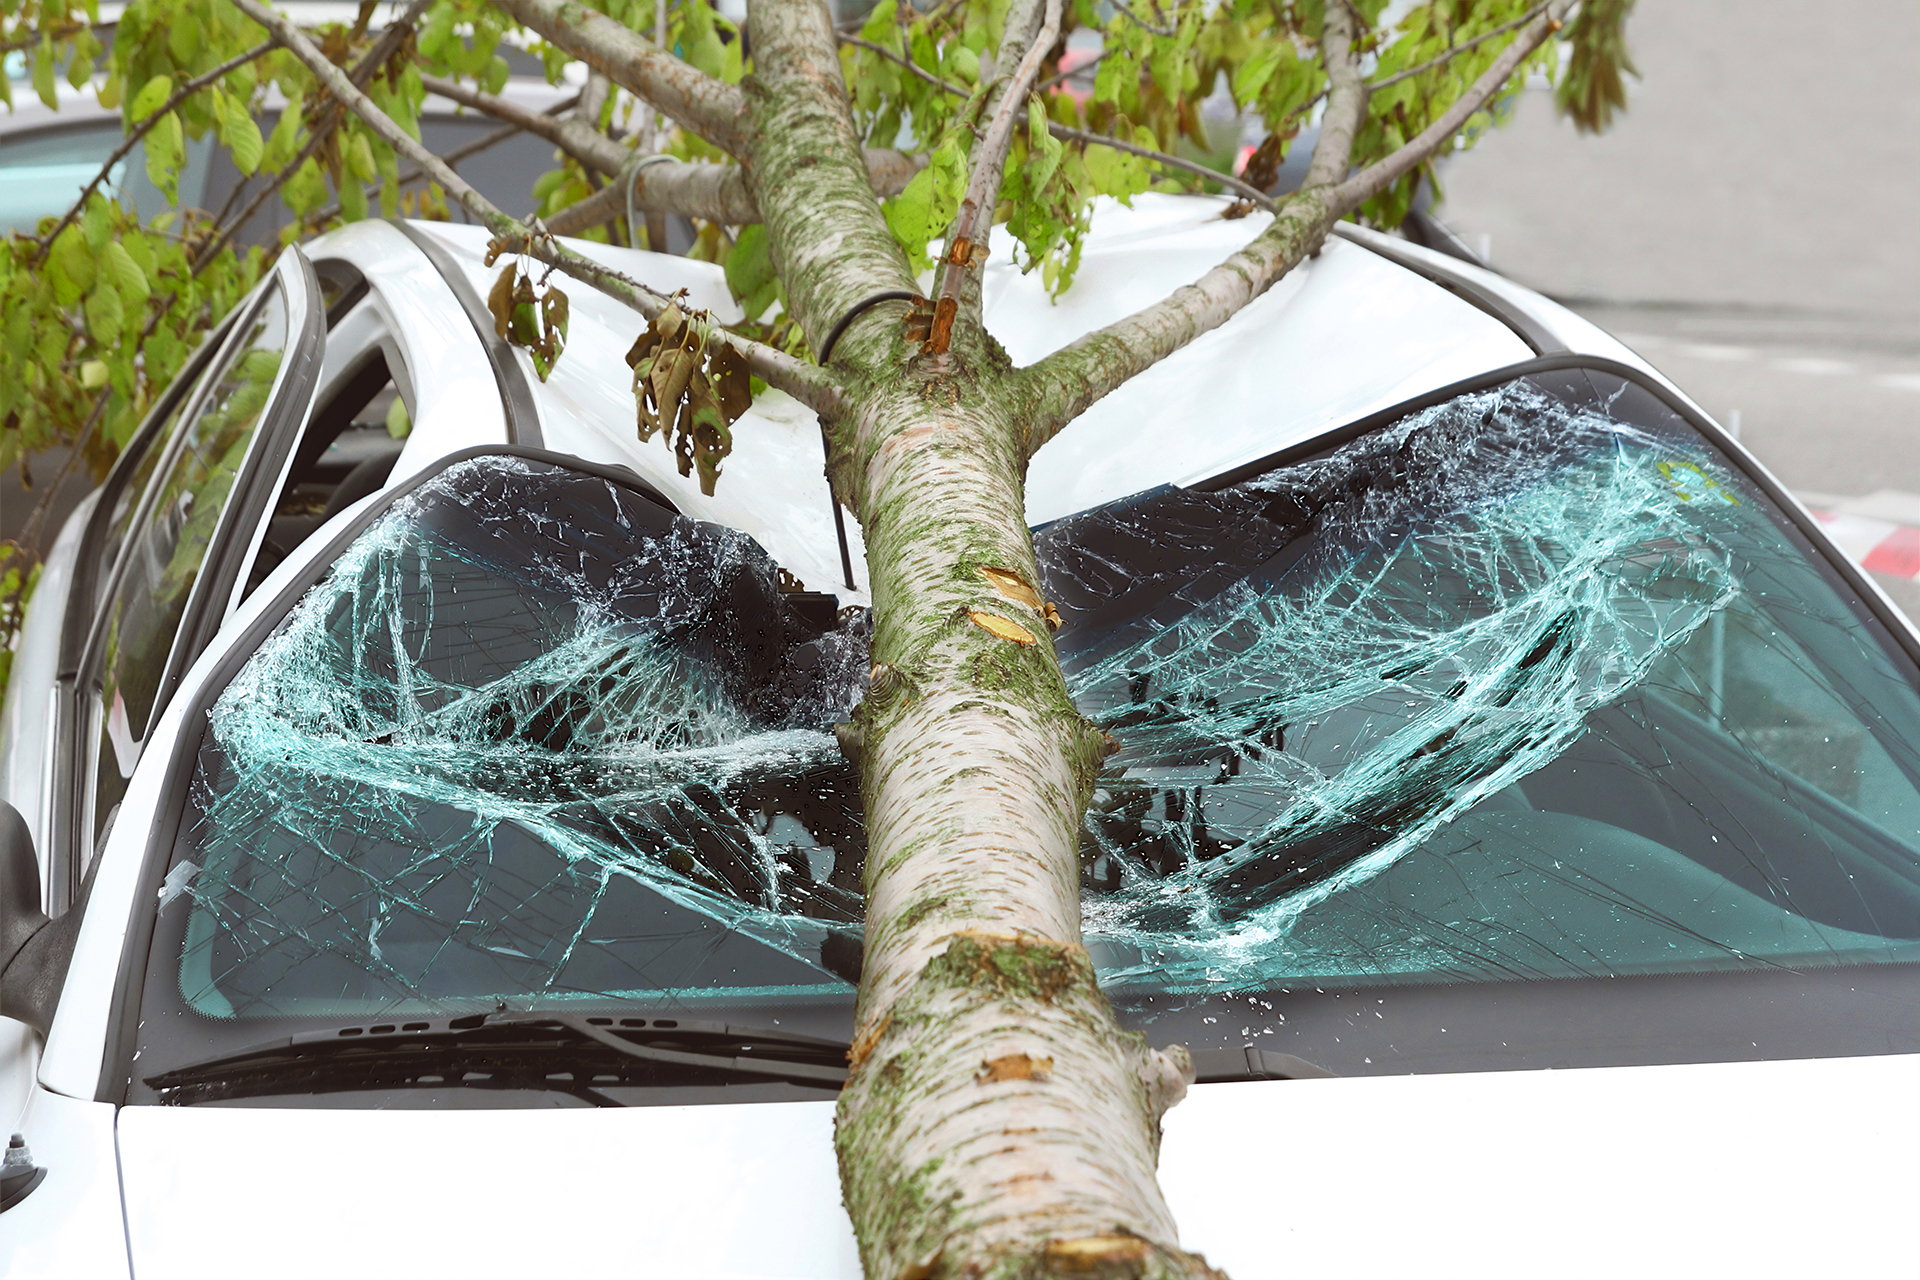 Tree Liability Risk Involves a Duty of Care Owed to Those Who May Be Harmed By Trees